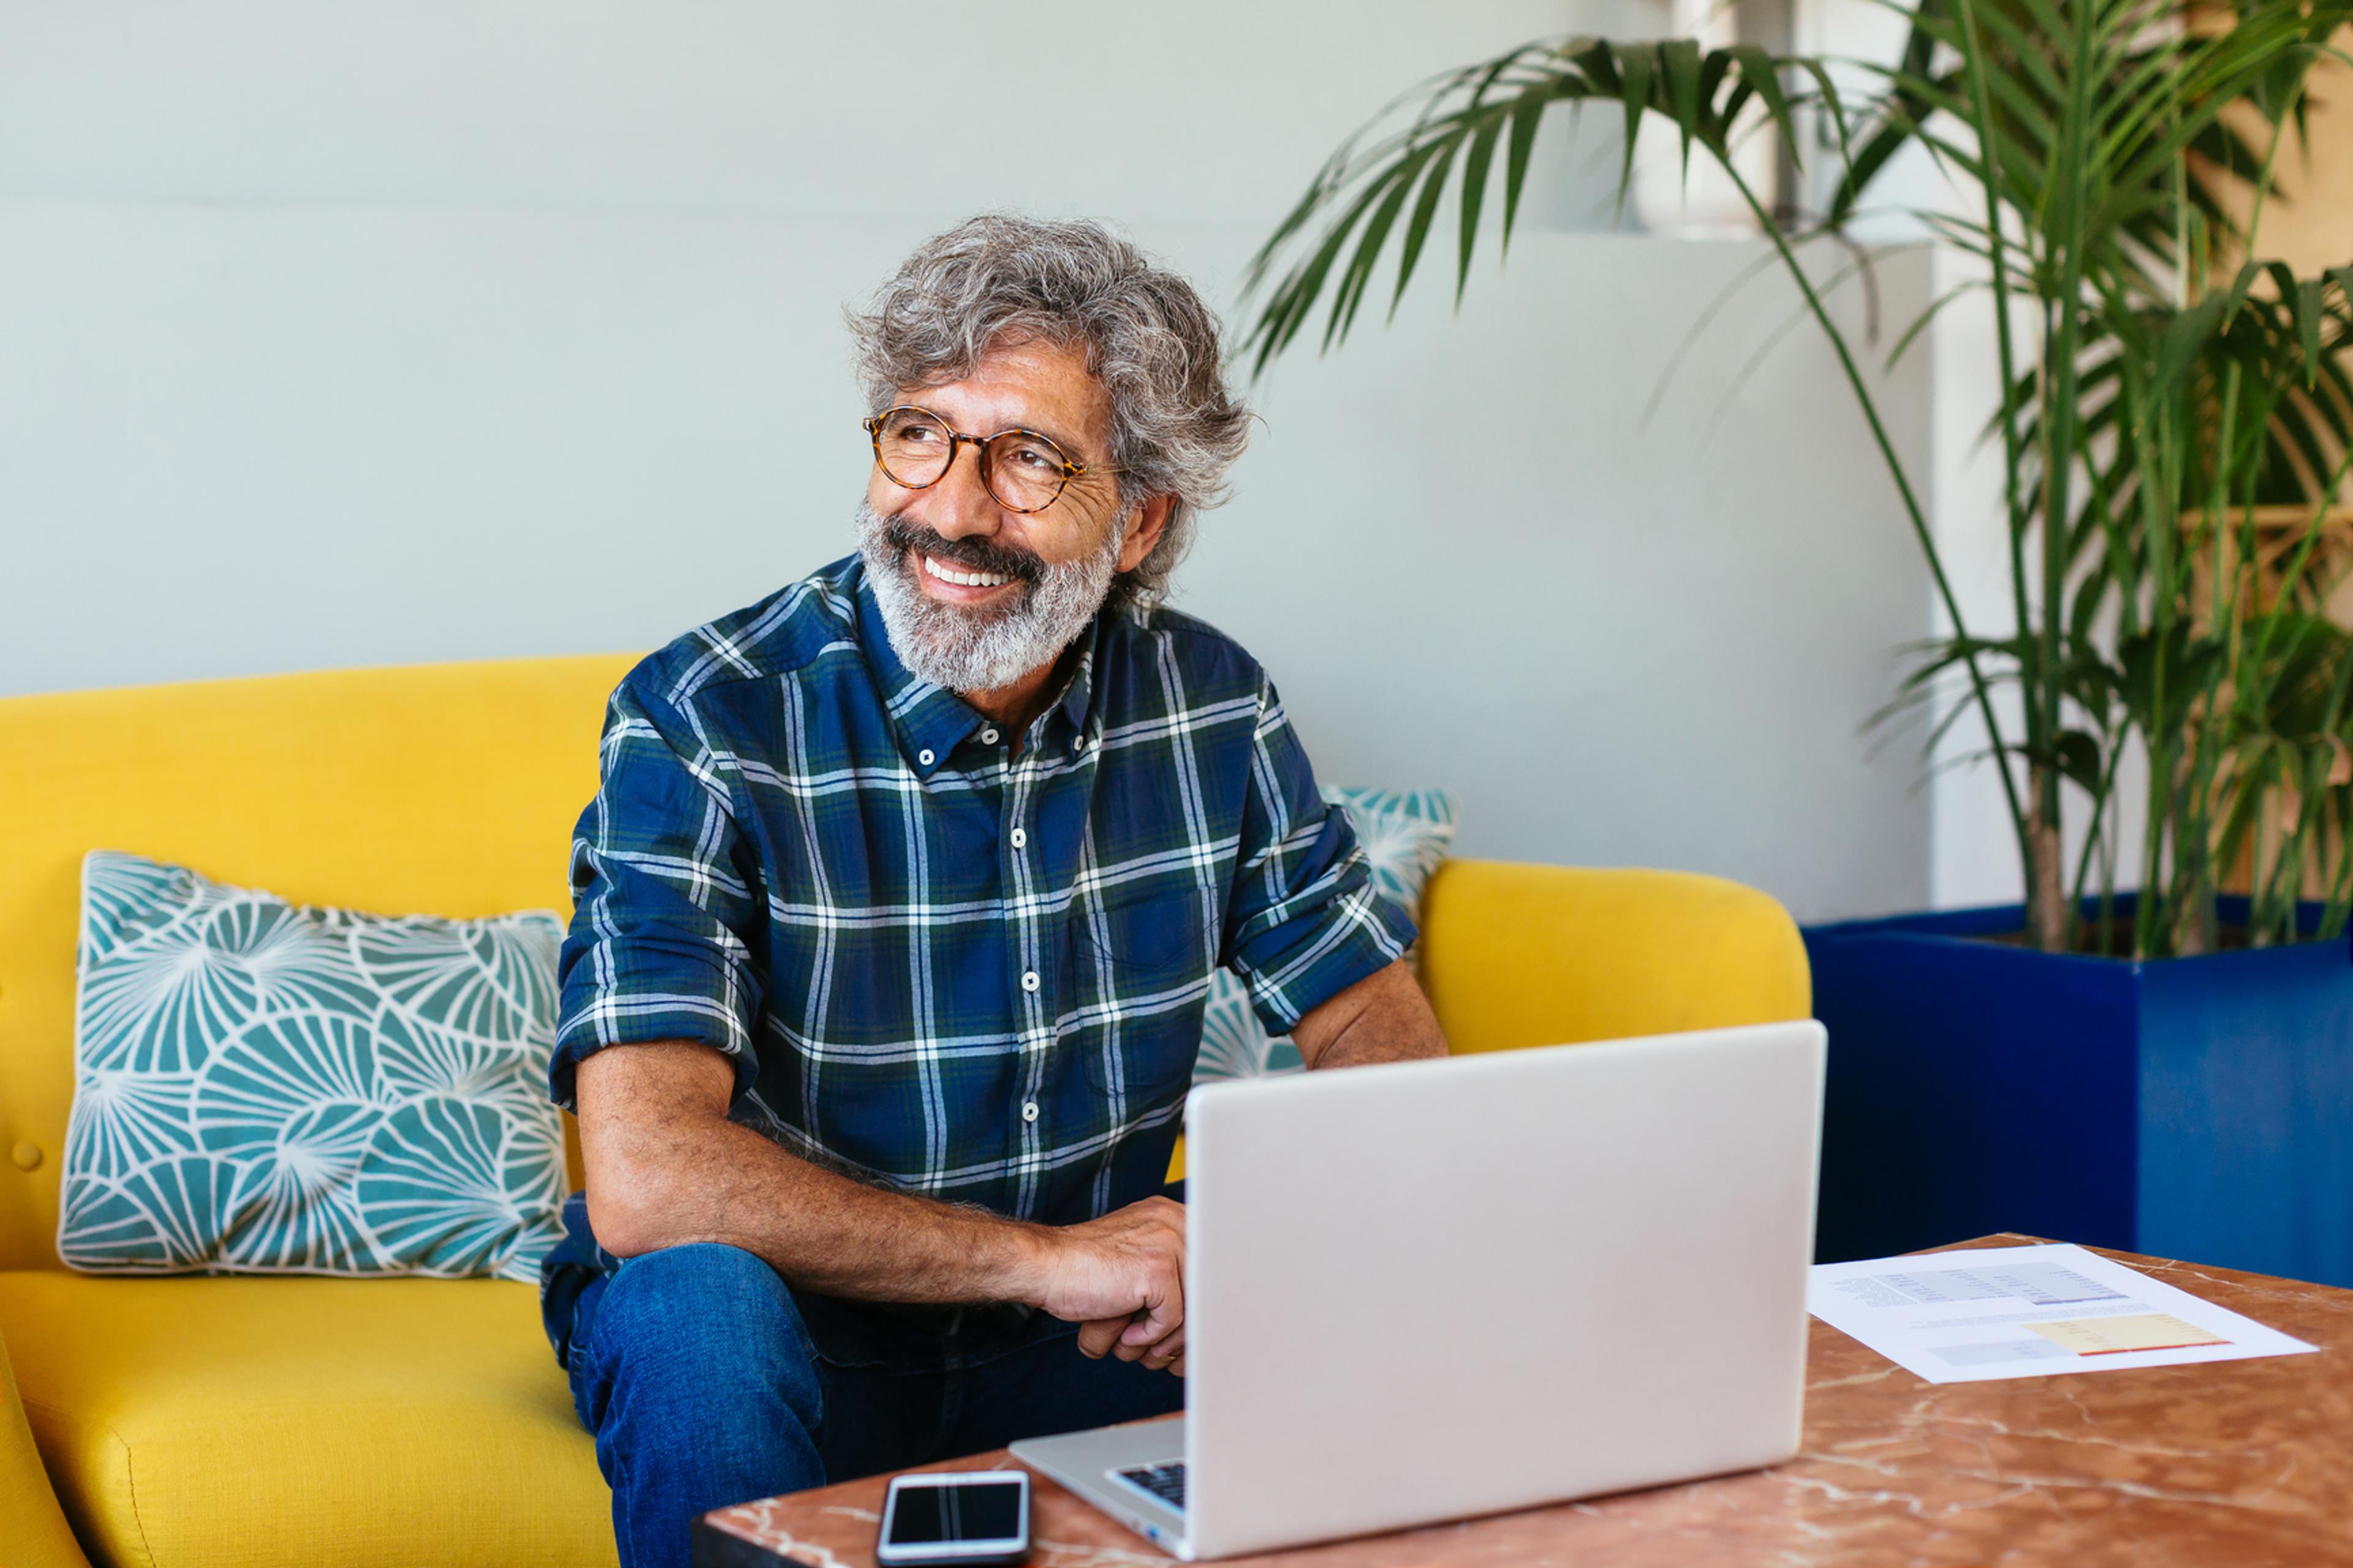 A photo of a man smiling while sat down in front of a laptop